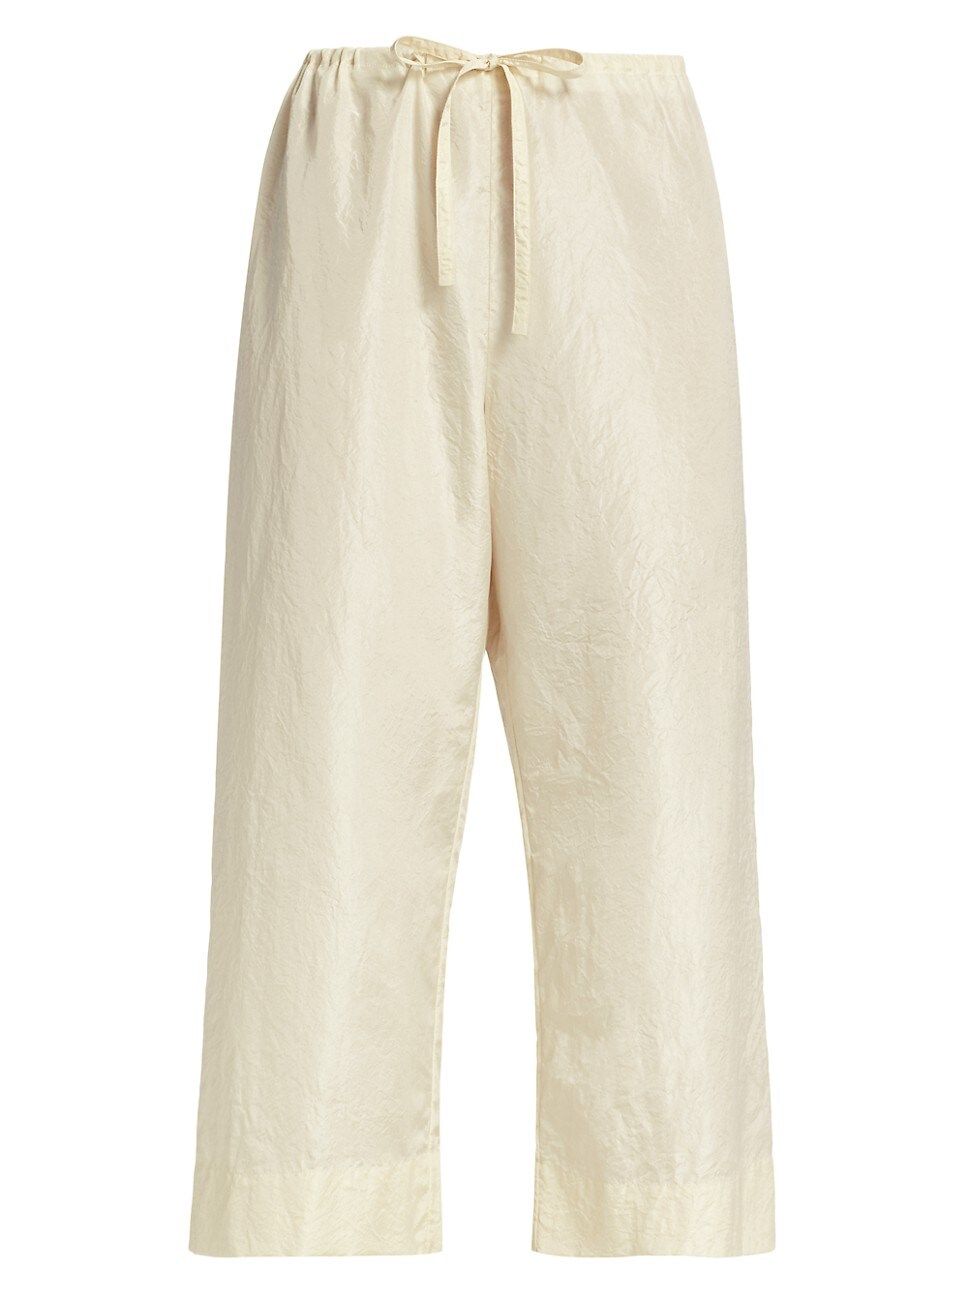 Hypnos Crushed Silk Pants | Saks Fifth Avenue